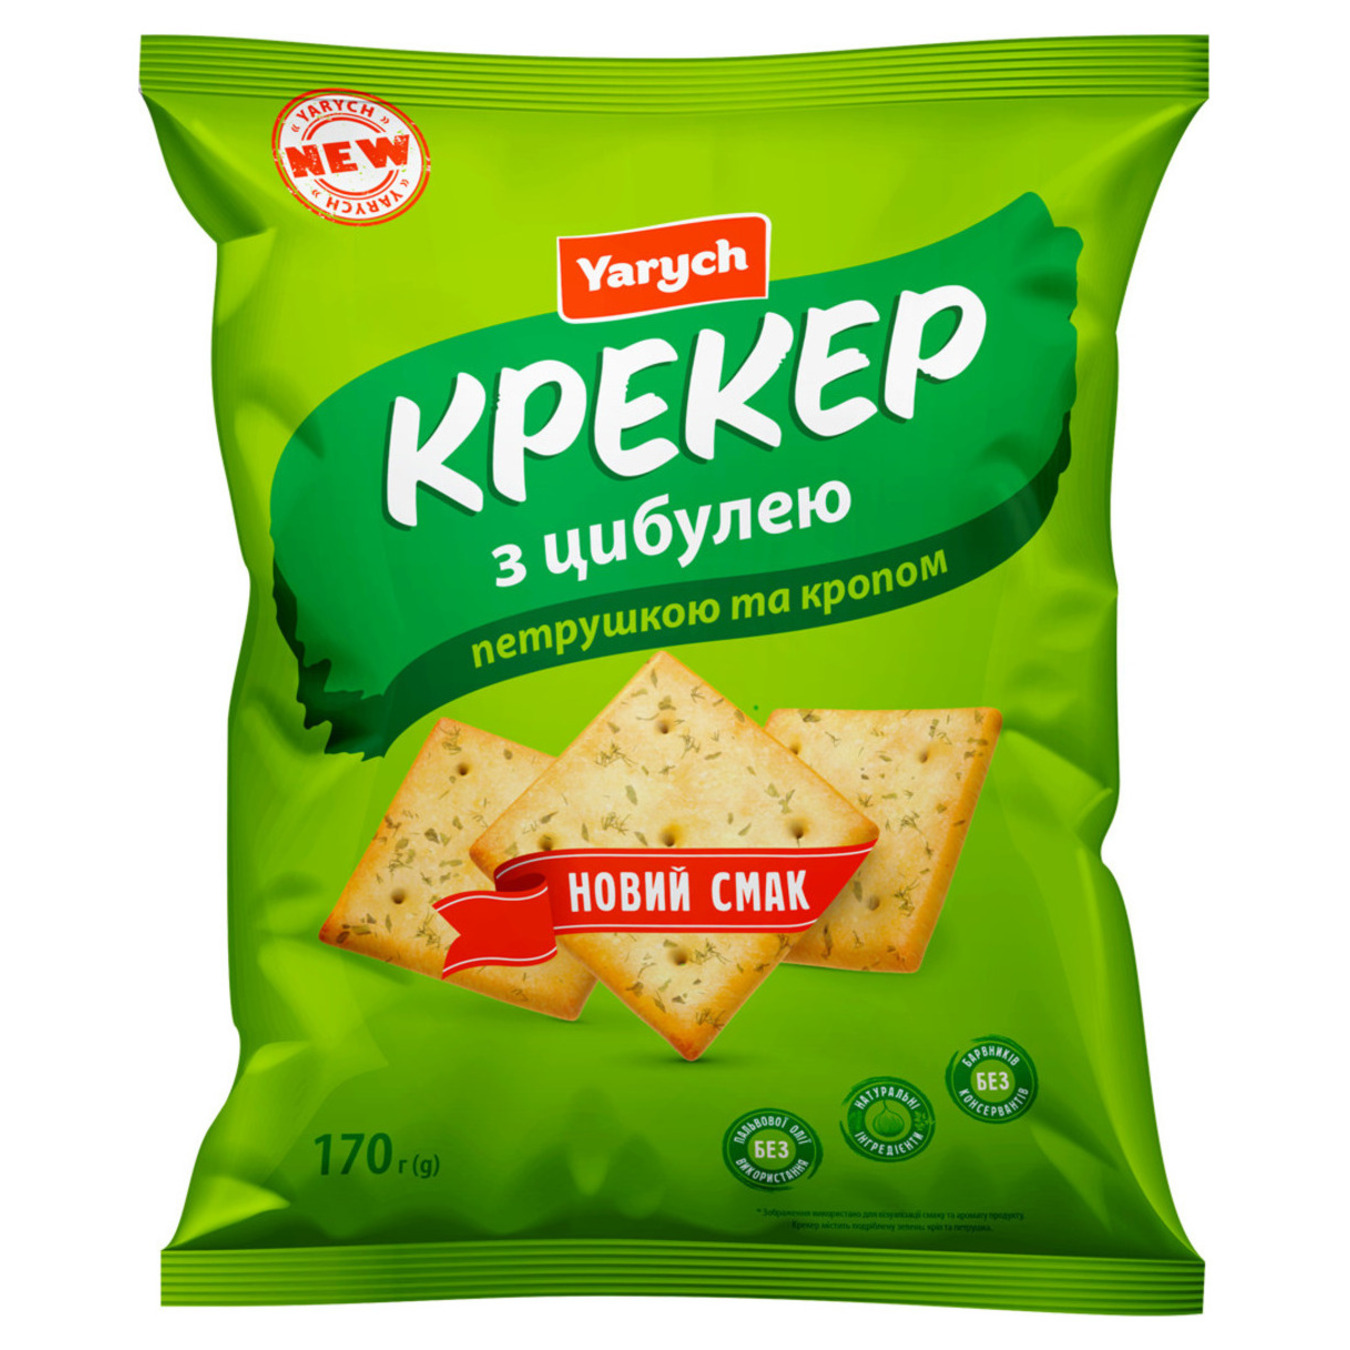 Yarych cracker with parsley and dill 170g